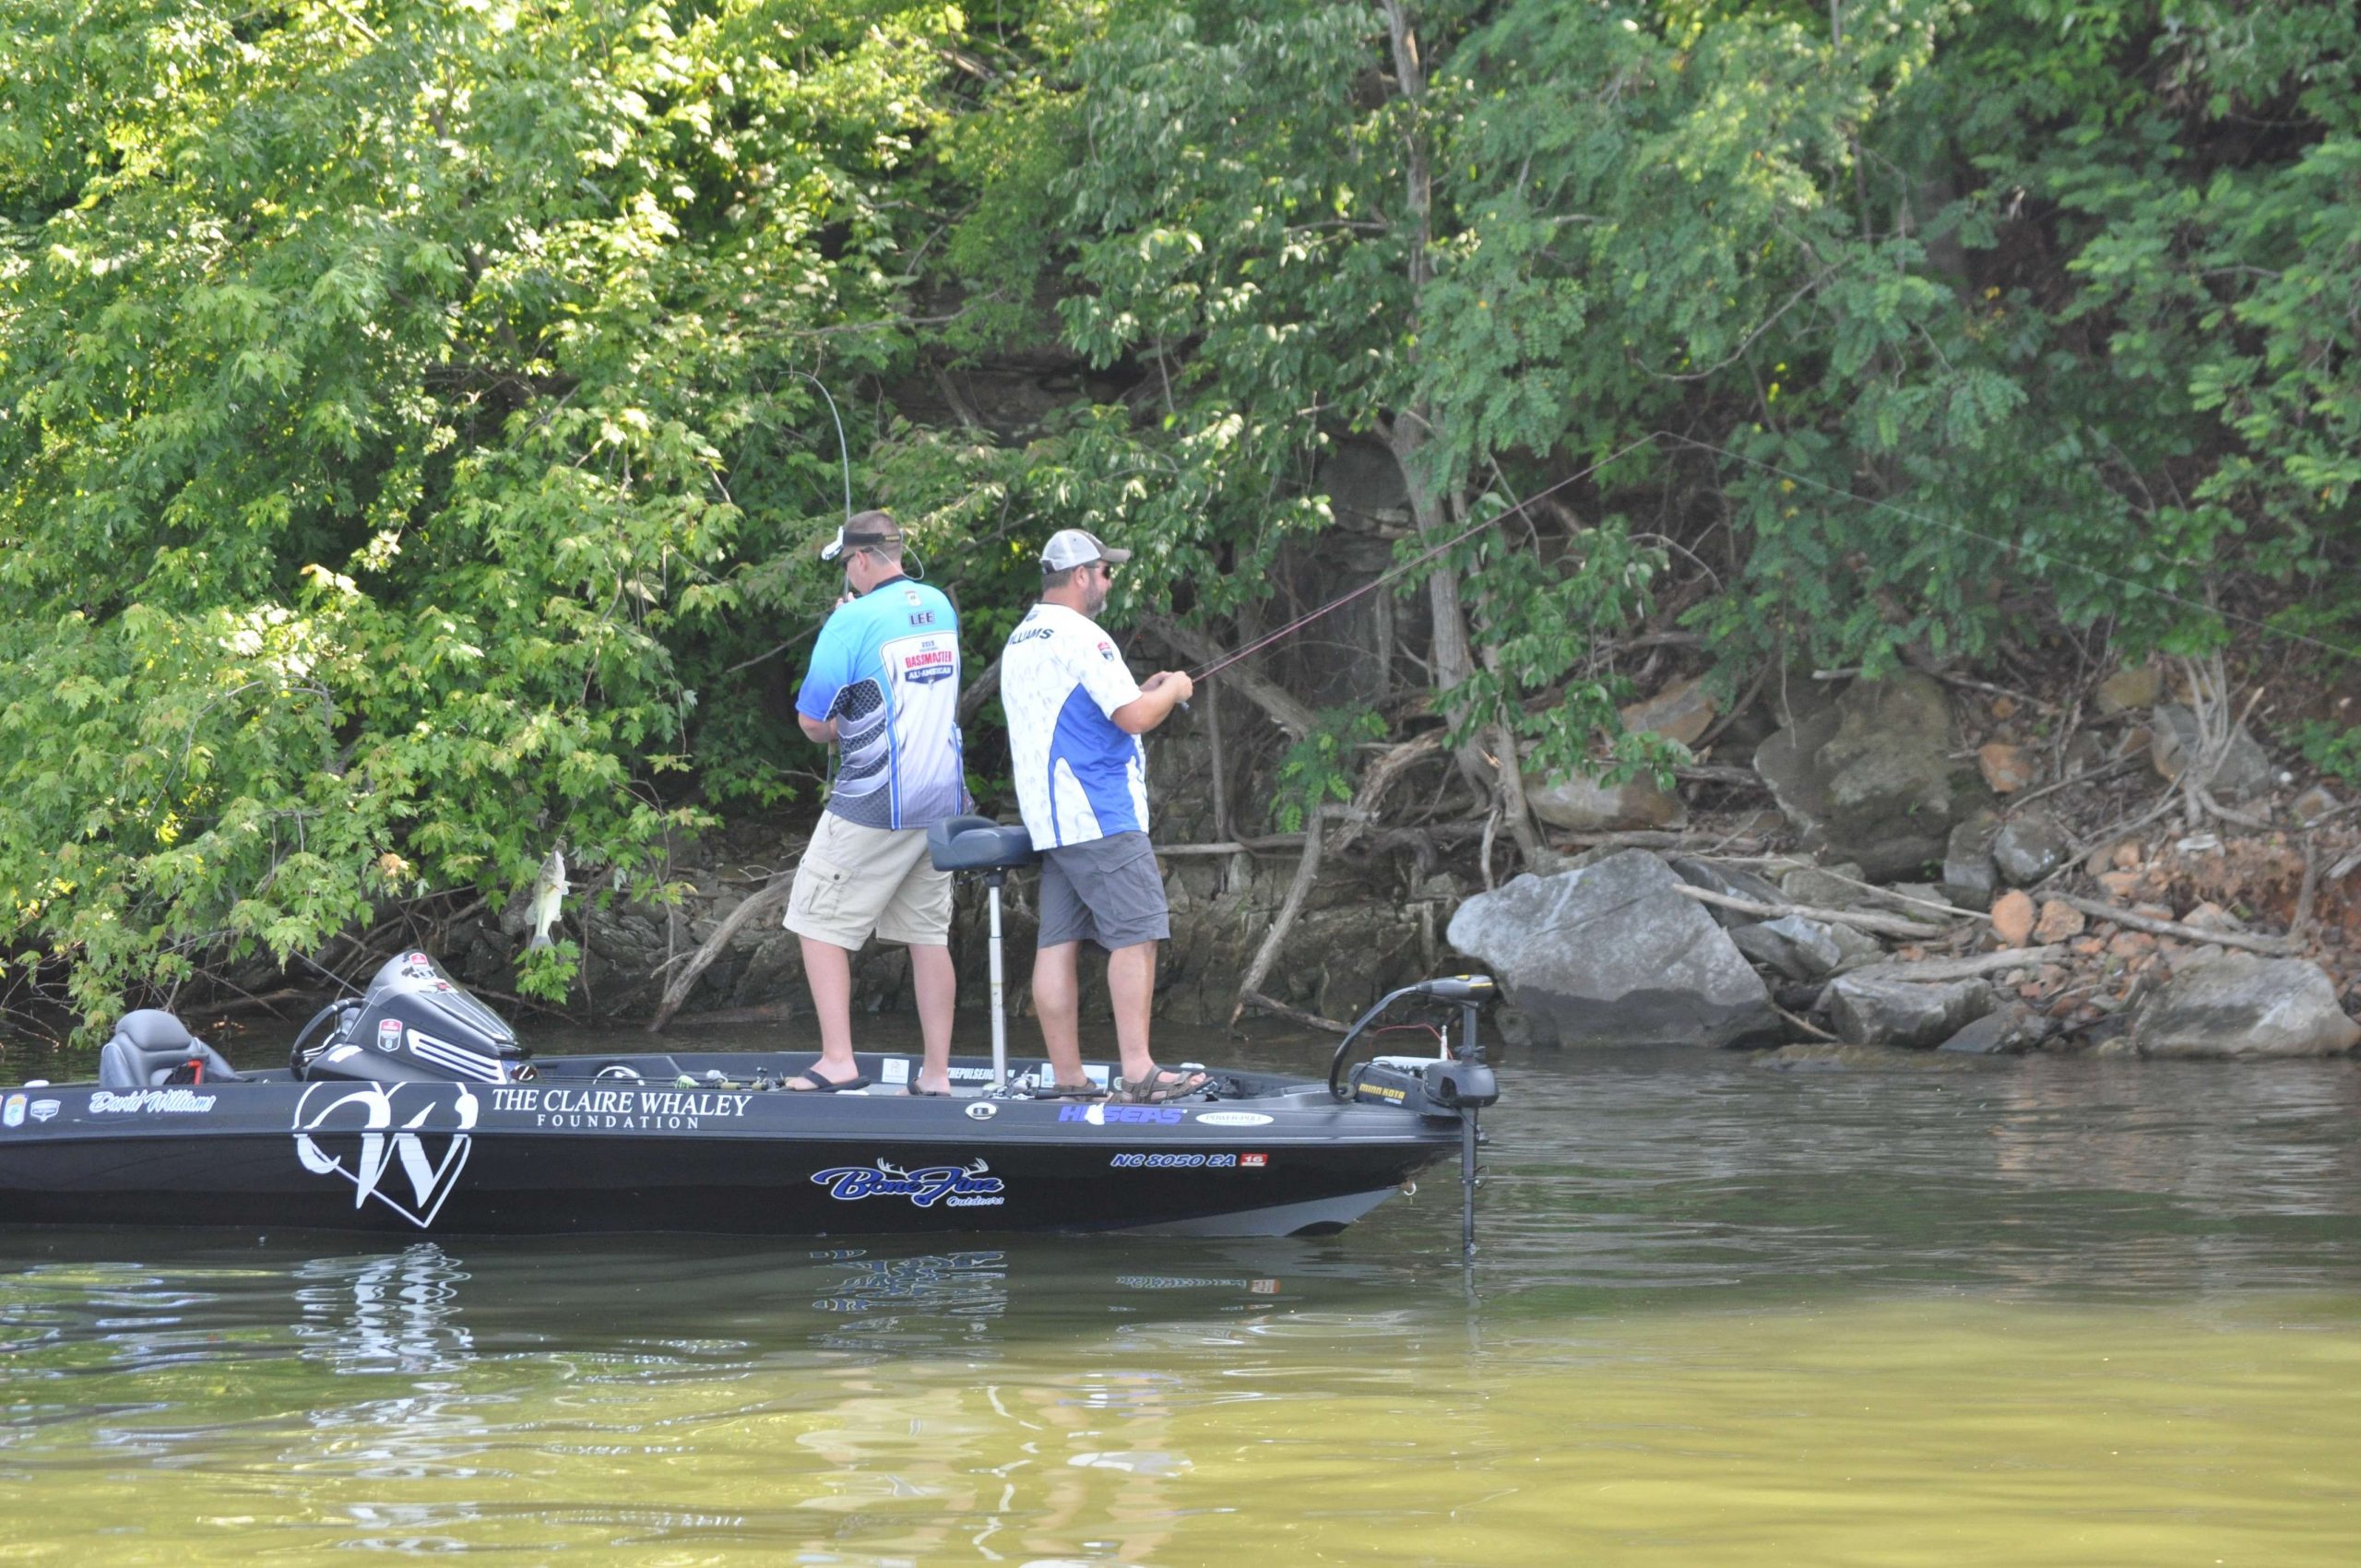 Lee swings a bass in the boat as Williams continues to cast toward the bank.